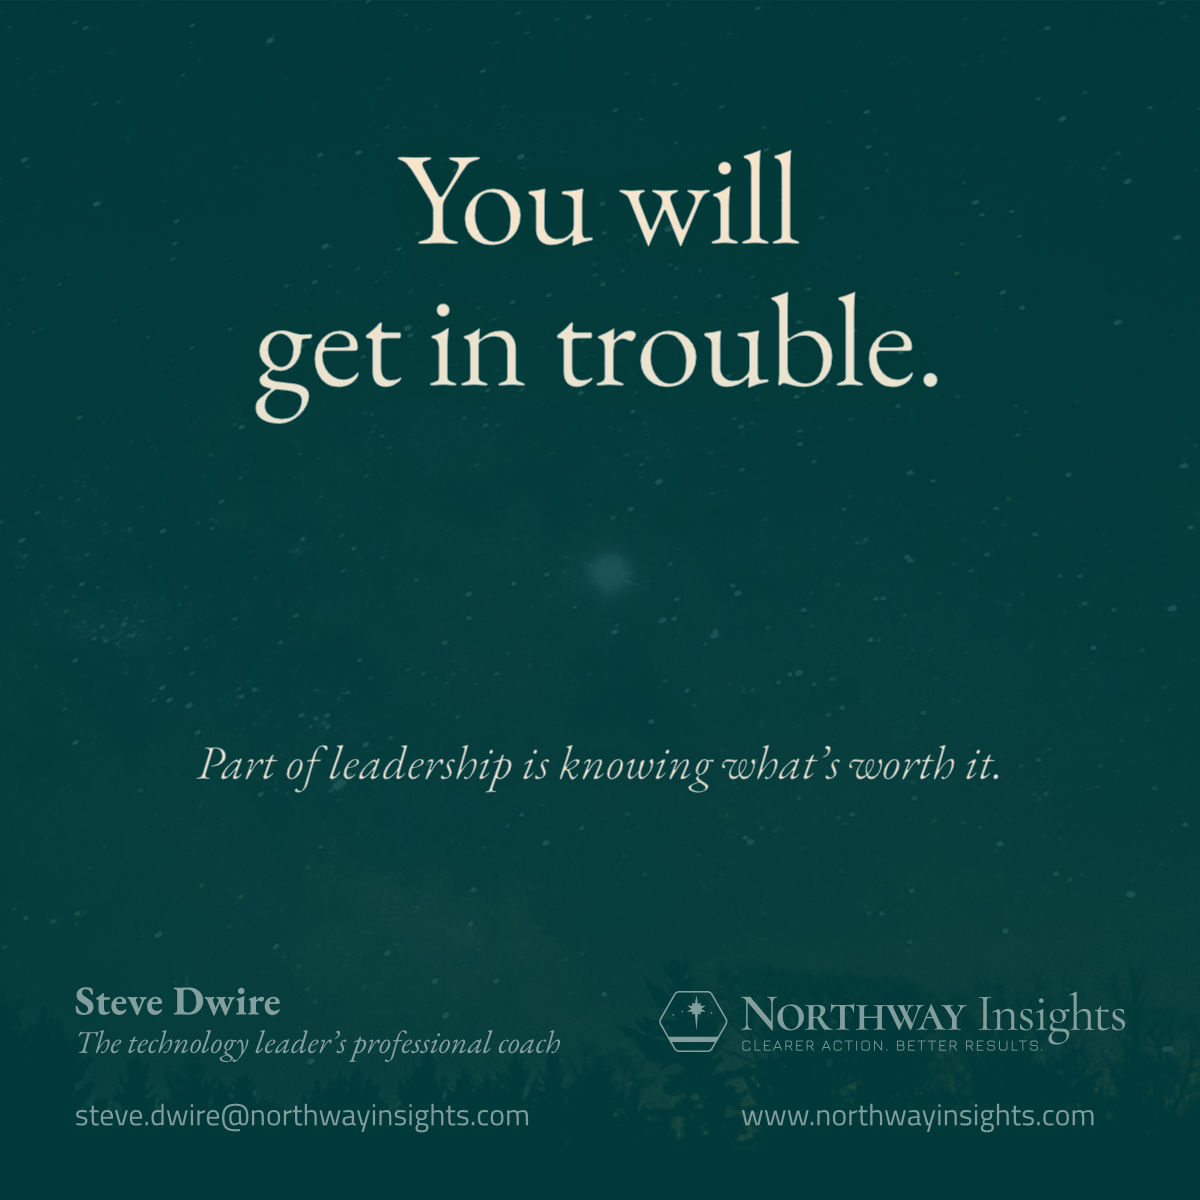 You will get in trouble. (Part of leadership is deciding what's worth it.)